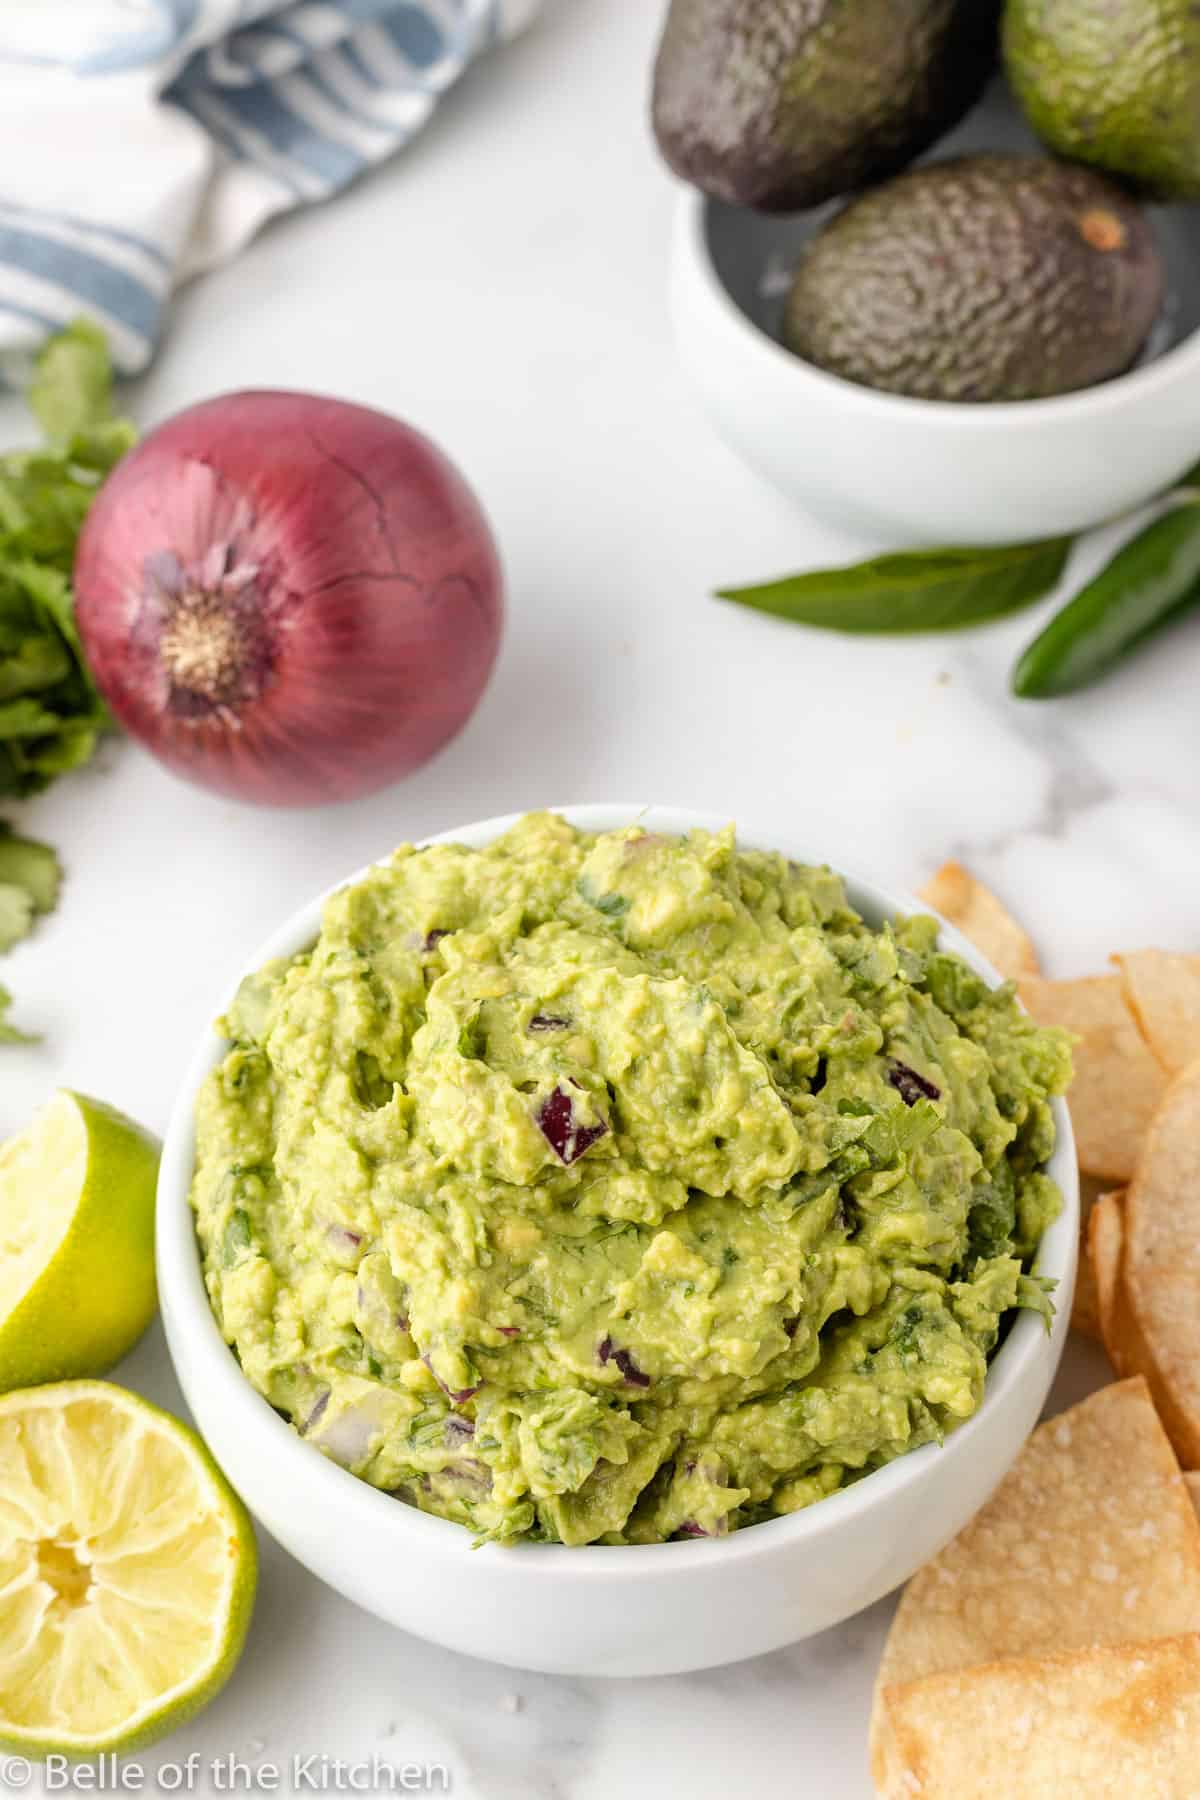 chips and limes next to a bowl of copycat Chipotle guacamole